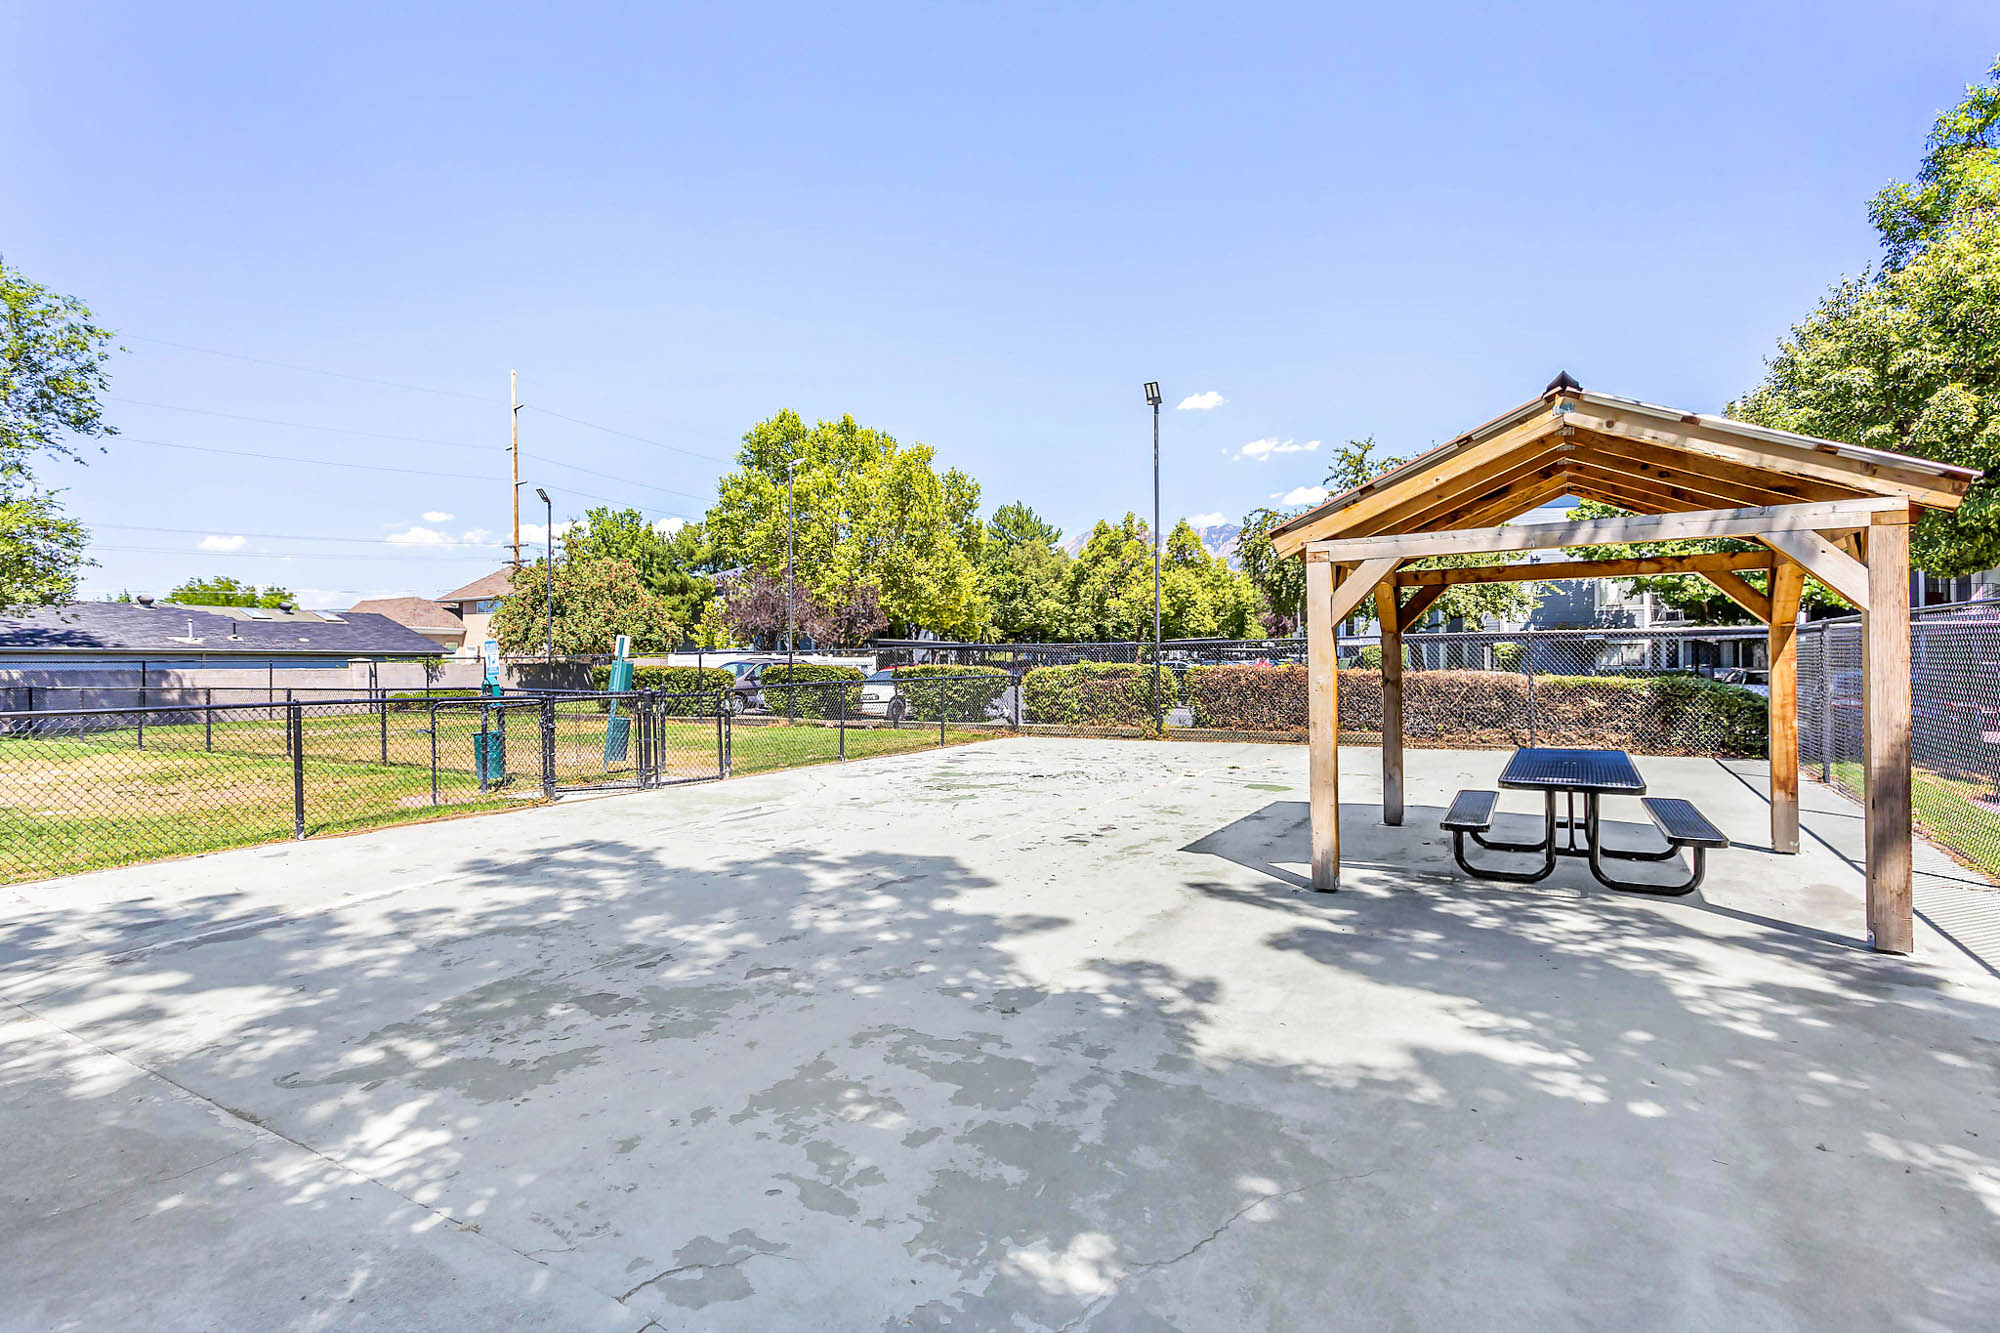 The picnic area at James Pointe apartments in Murray, Utah.